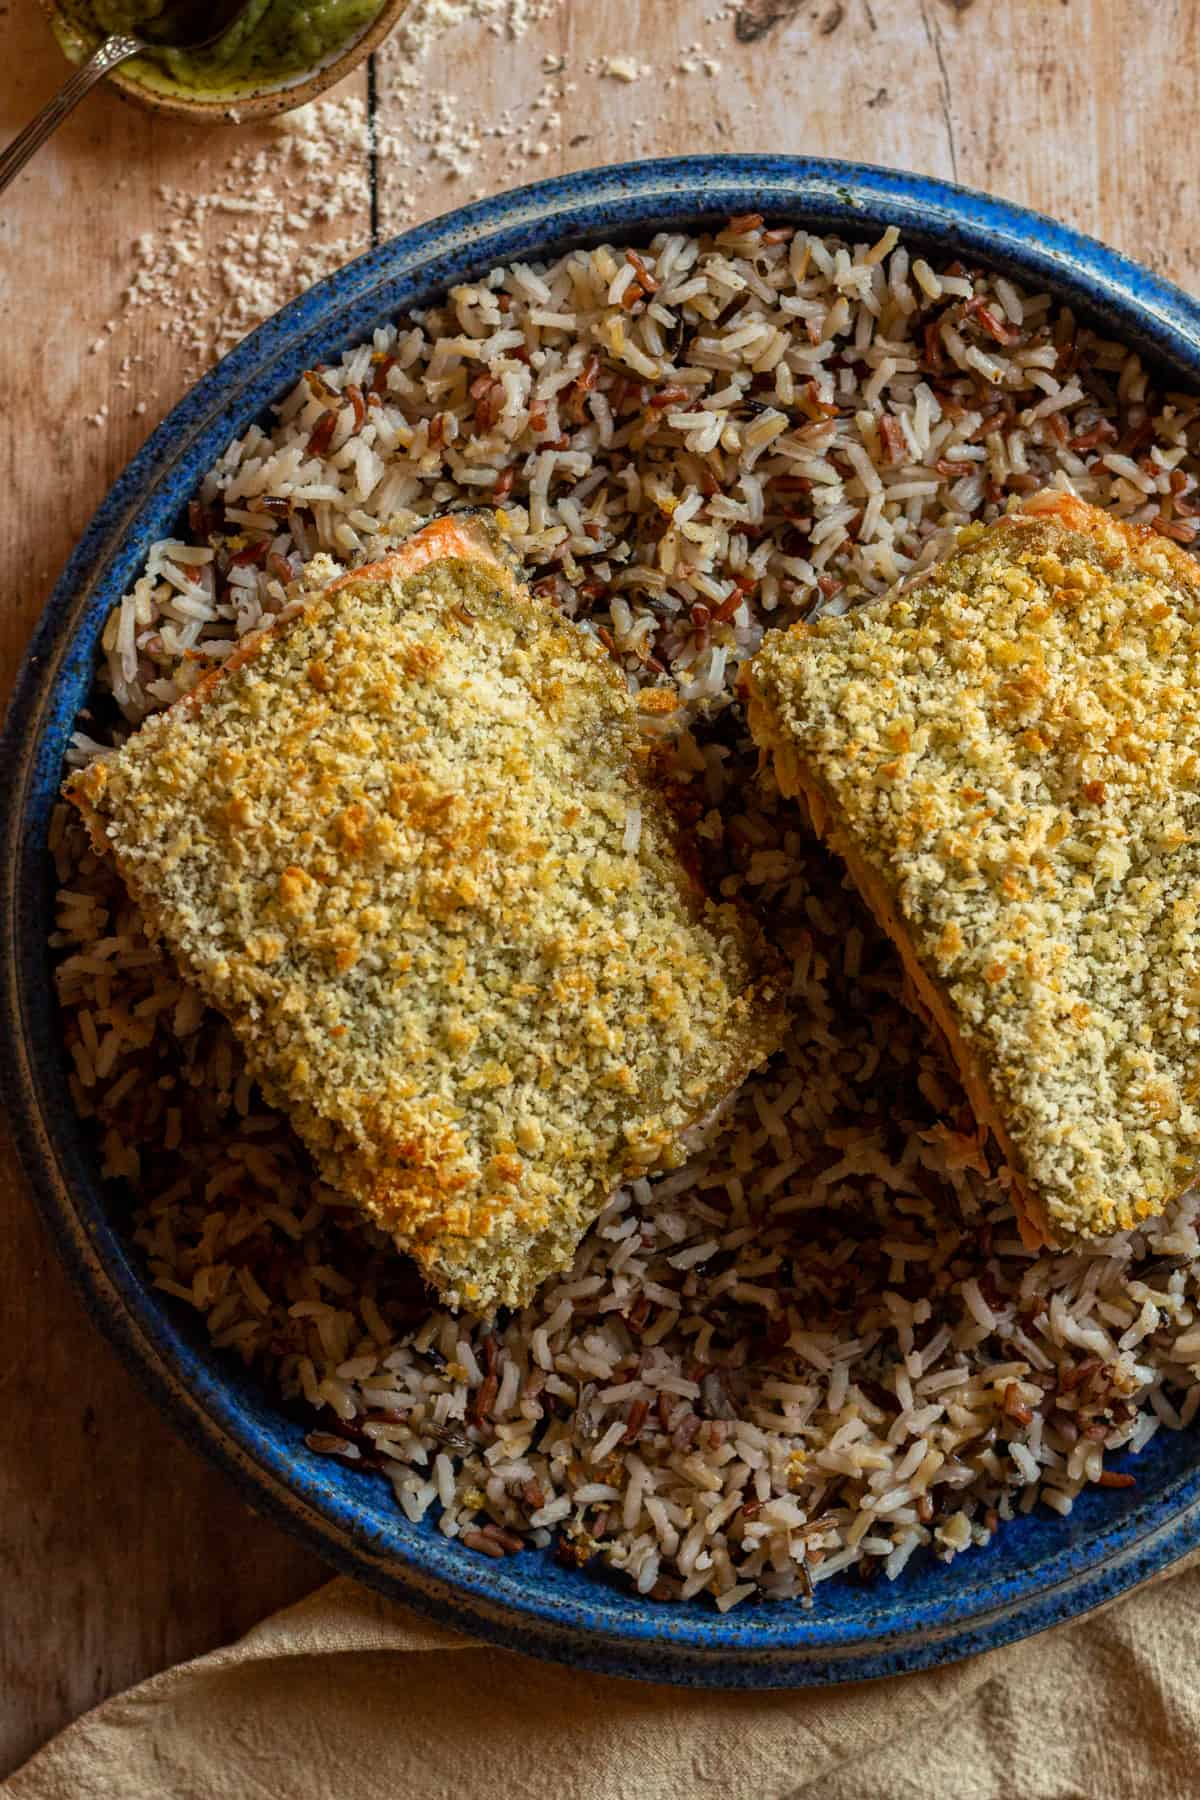 Pesto crusted salmon with panko bread crumbs and parmesan cheese, on a blue plate, over a bed of wild rice.